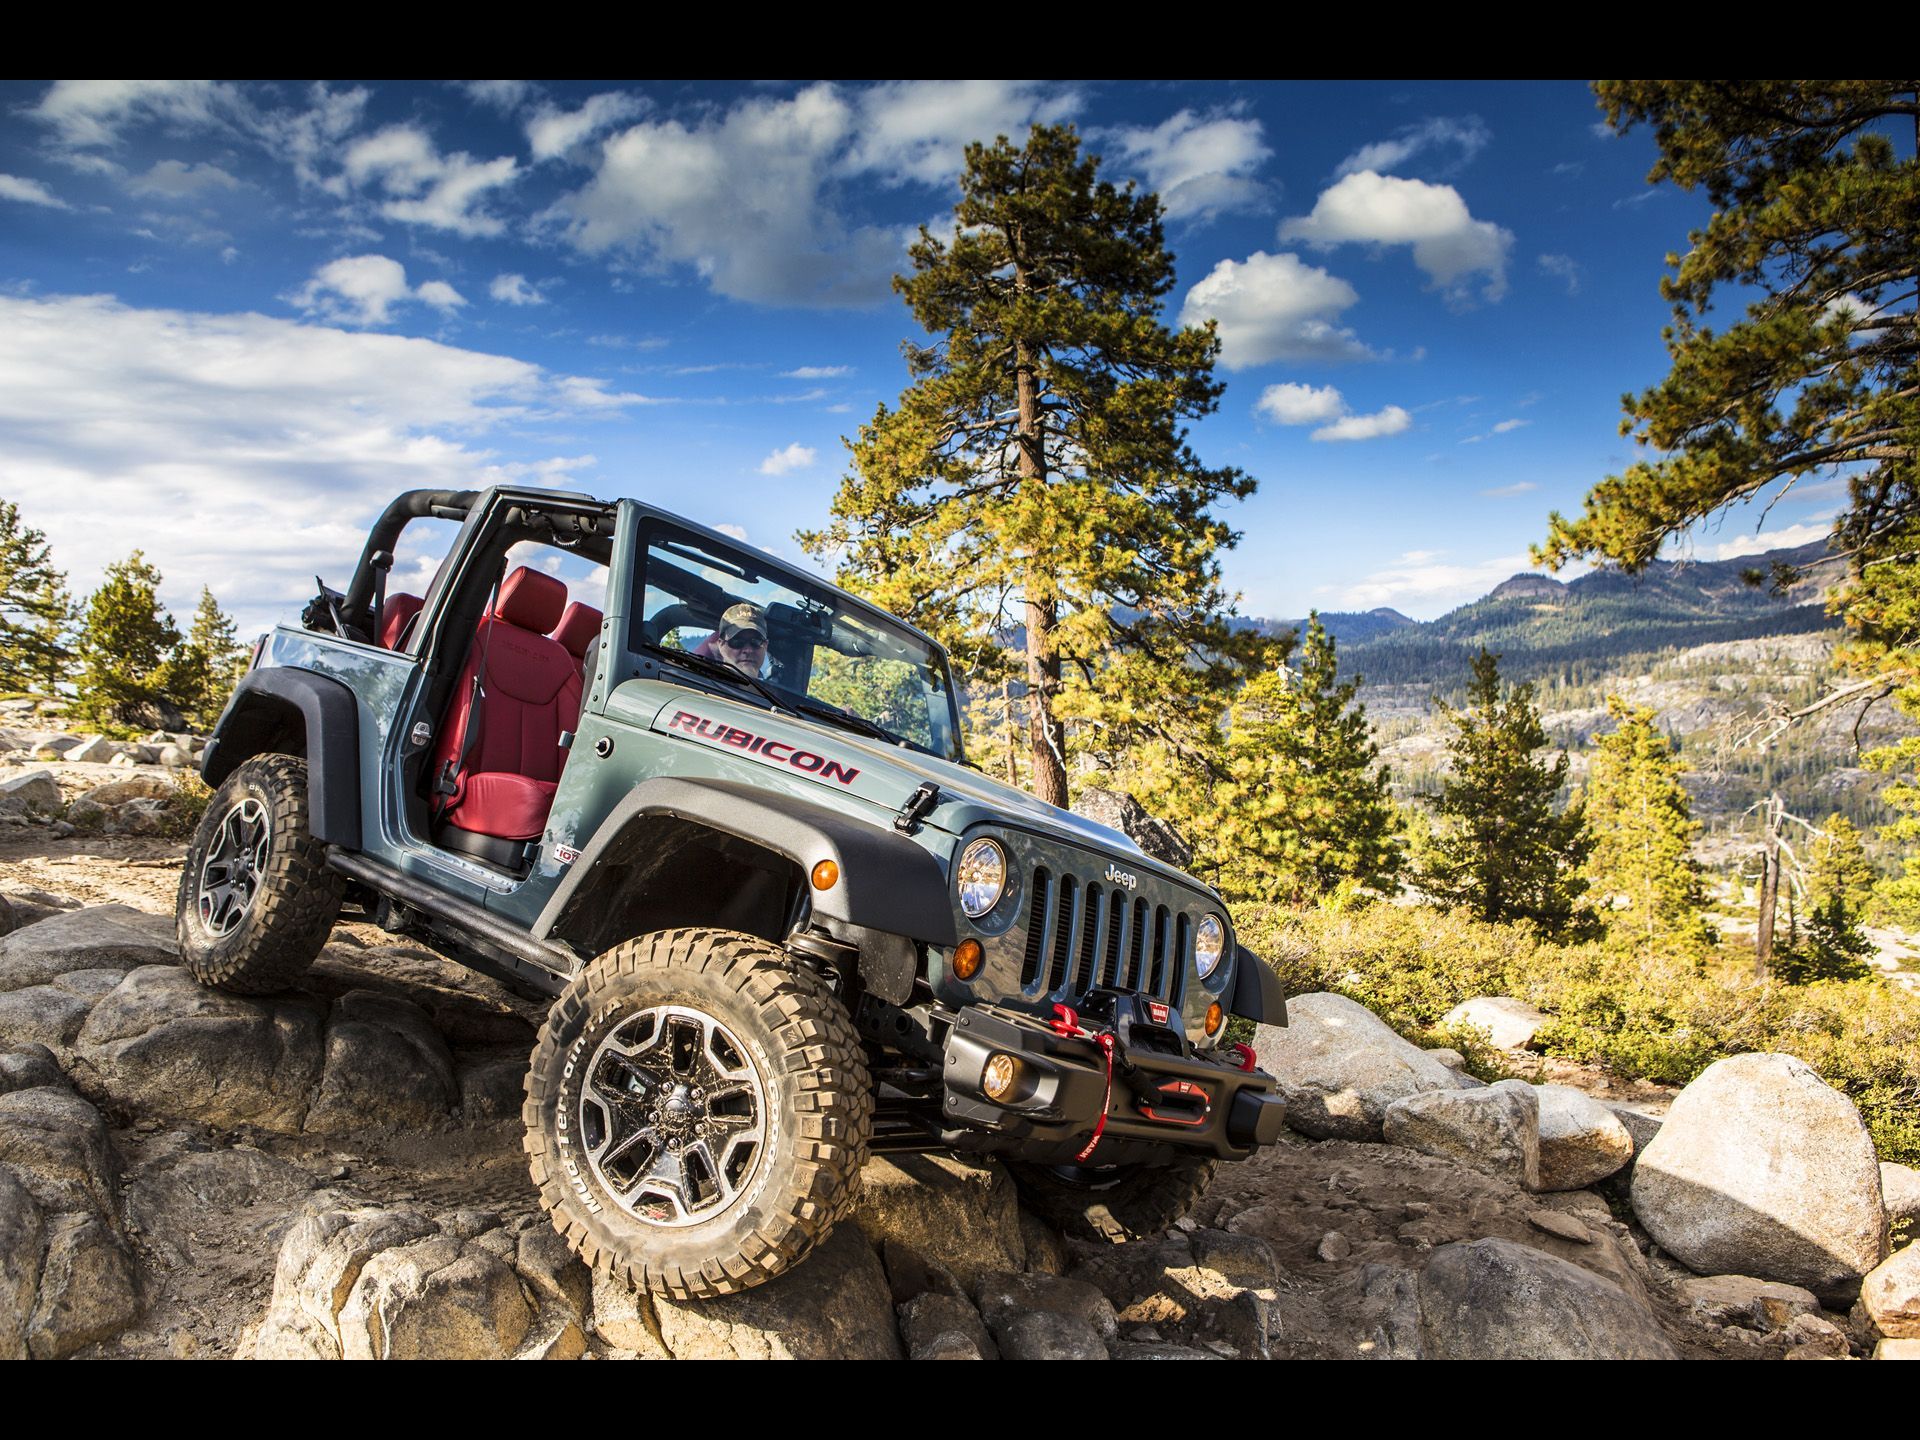 Jeep Wrangler Wallpaper HD | Full HD Pictures